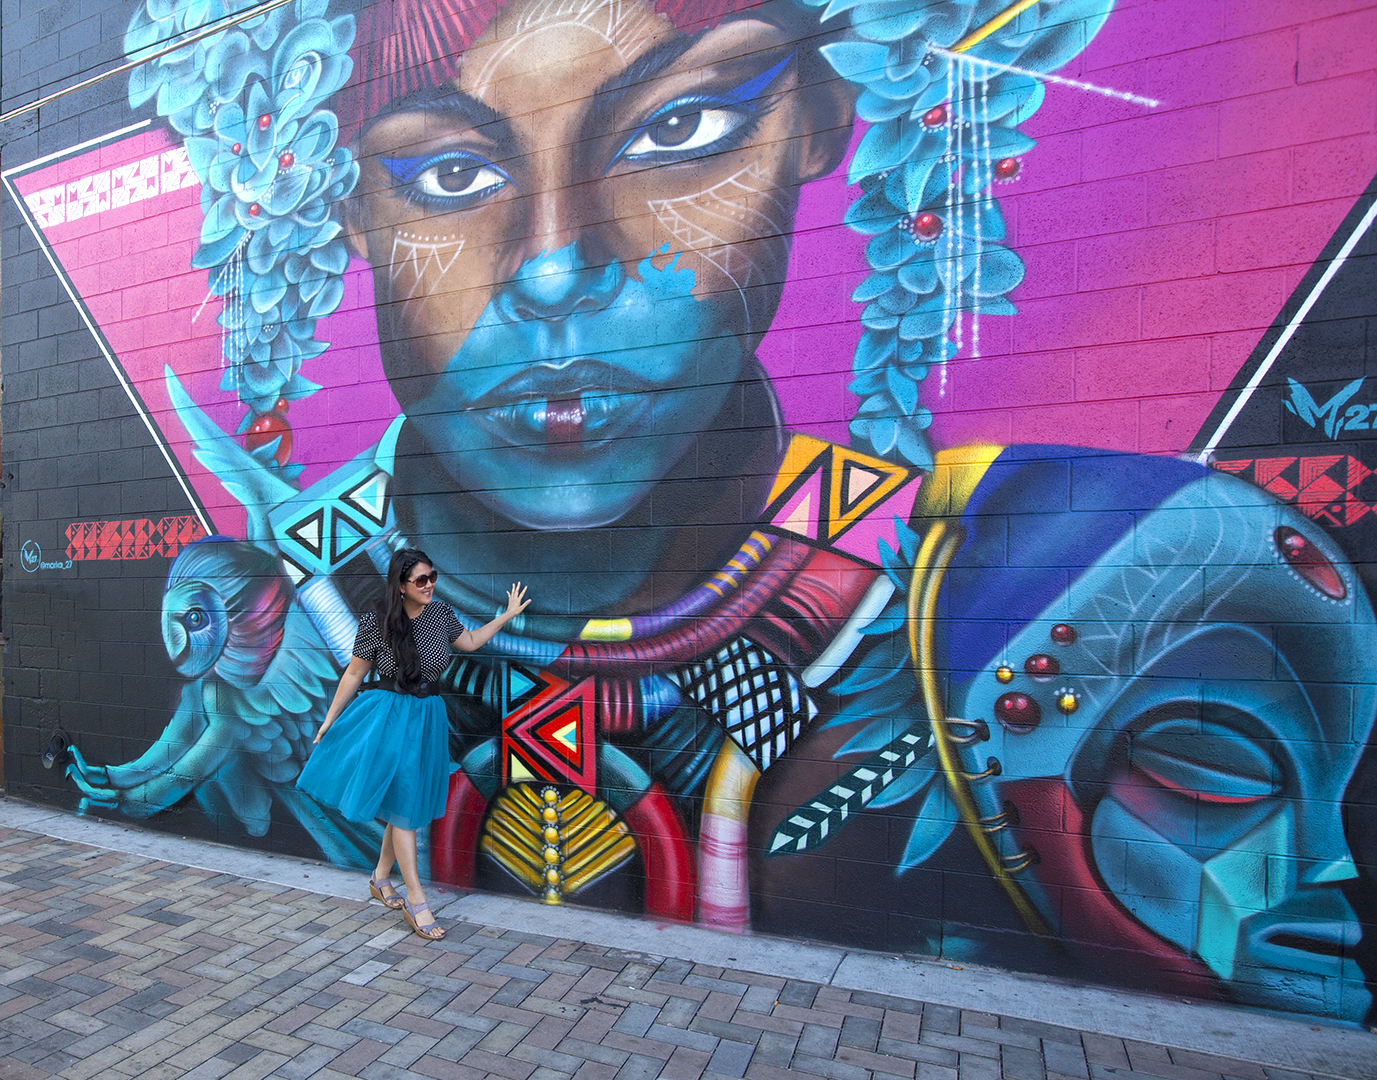 Denver Sites to See - RiNo Art District